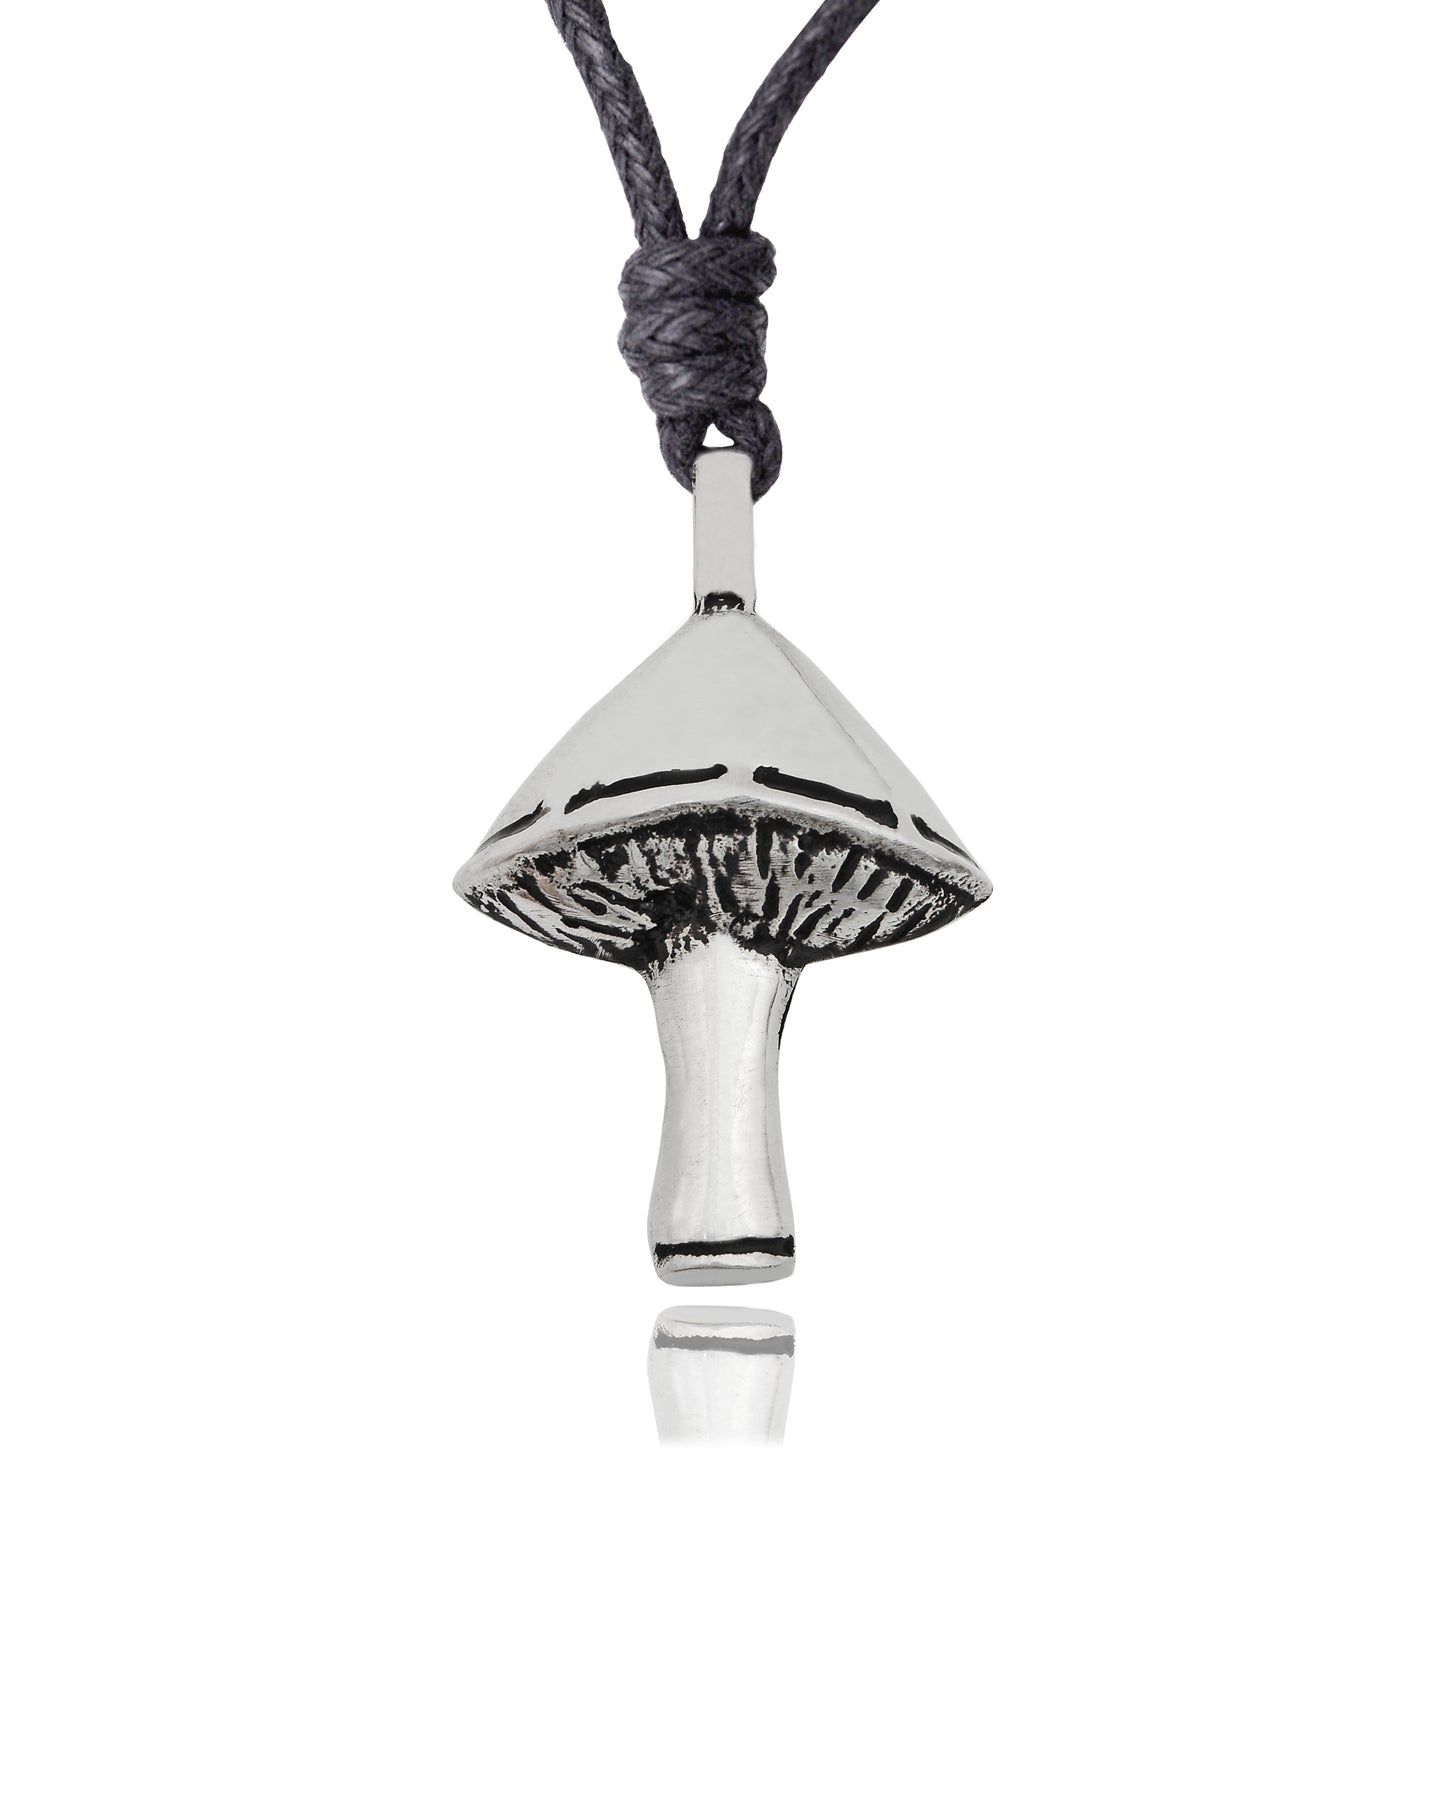 Mushroom Silver Pewter Charm Necklace Pendant Jewelry